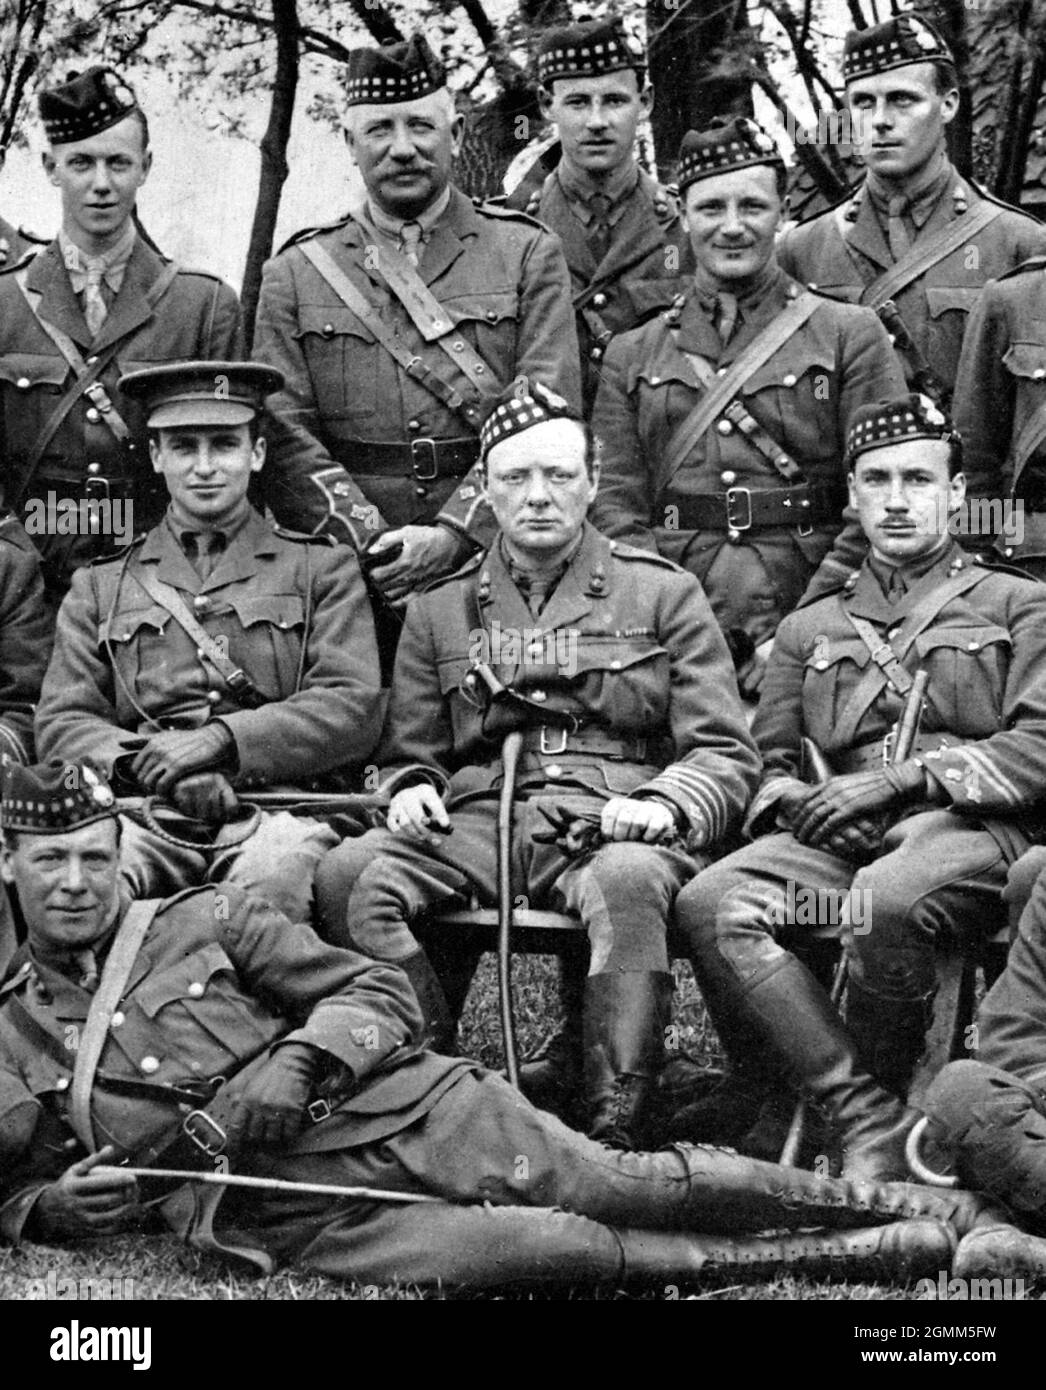 Lieutenant-Colonel Winston Churchill in 1916 with the 6th Royal Scots Fusiliers at Ploegsteert on the French-Belgian border. To the left of him is his second-in-command, friend and future Liberal Party leader Major Archie Sinclair. Stock Photo